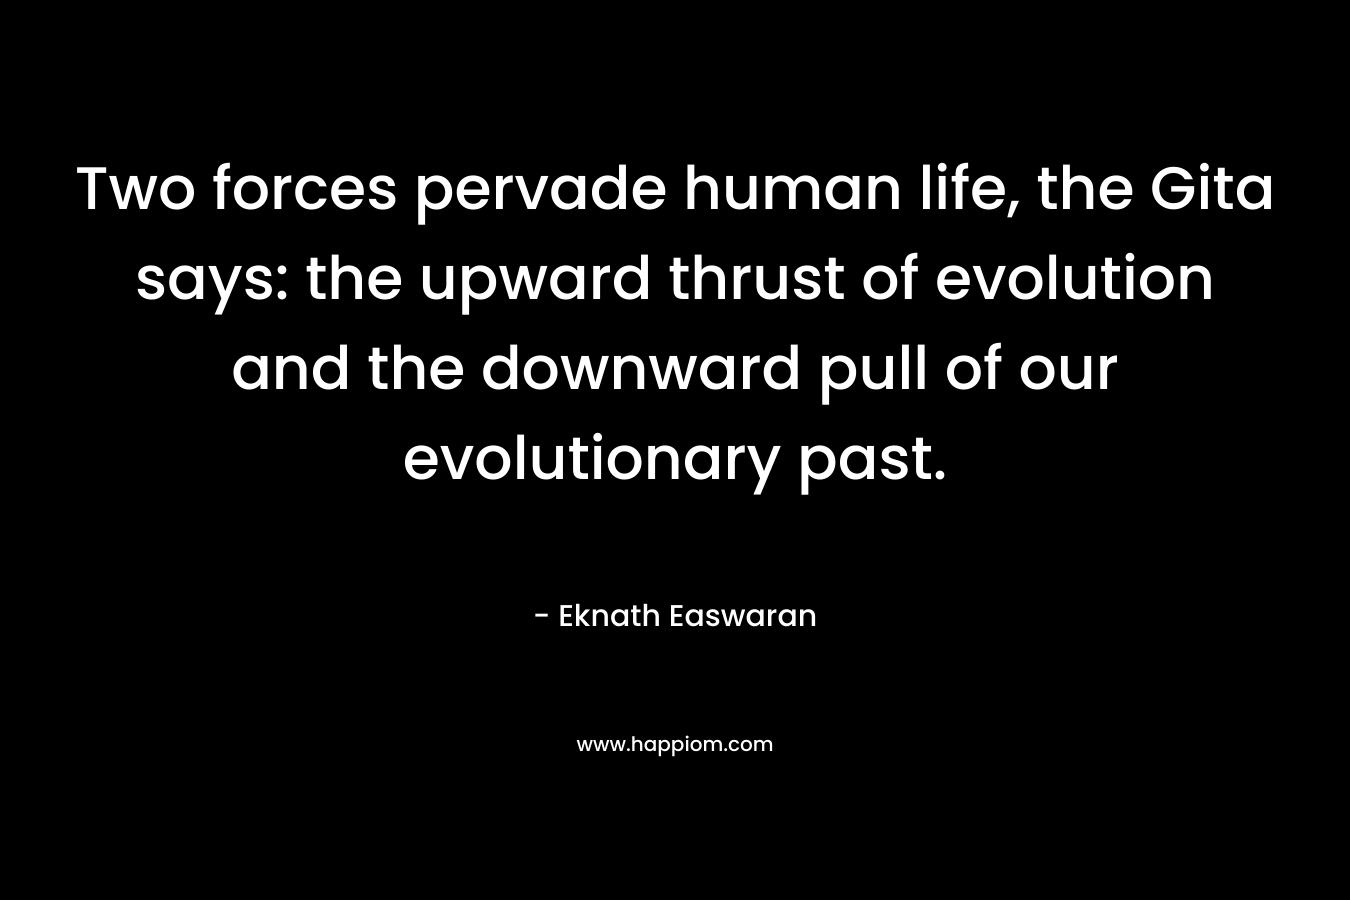 Two forces pervade human life, the Gita says: the upward thrust of evolution and the downward pull of our evolutionary past. – Eknath Easwaran